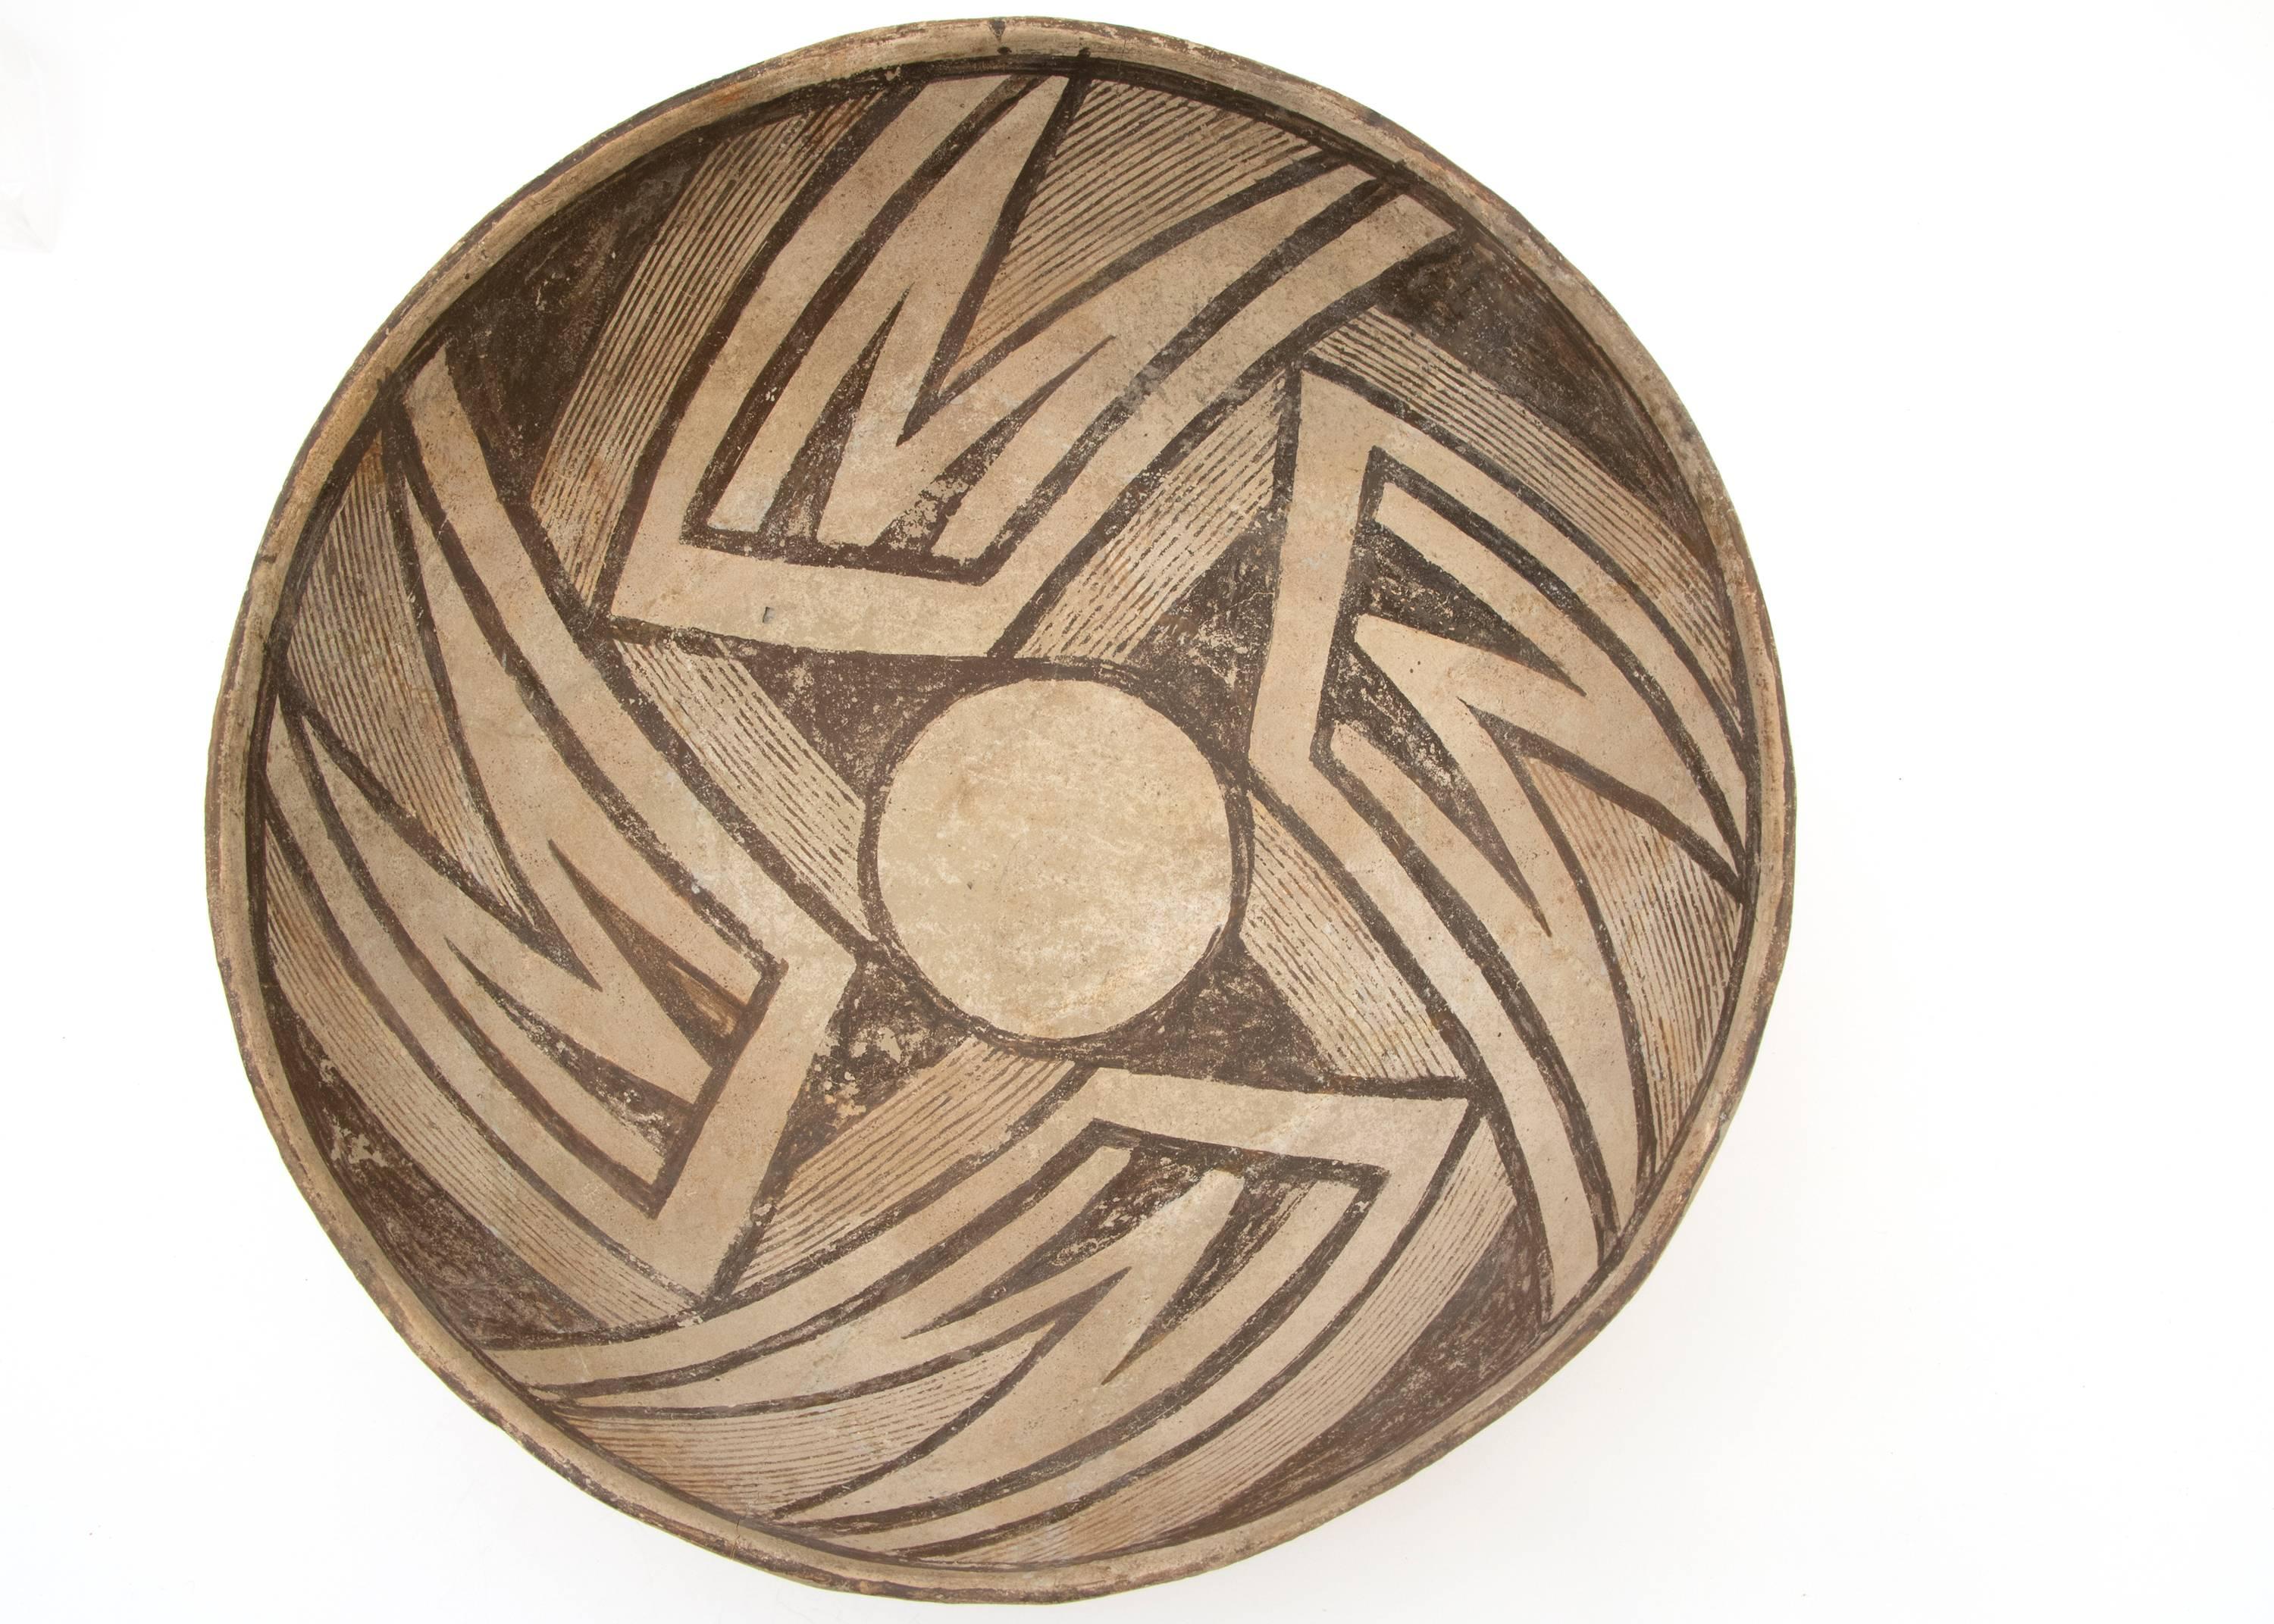 A Mimbres black-on-white earthenware bowl finely painted with slip glazes in a geometric pattern. 

The Mimbres, part of the Mogollon Culture of Pueblo Indians, lived in the Mimbres Valley including the upper Gila River and parts of the upper San